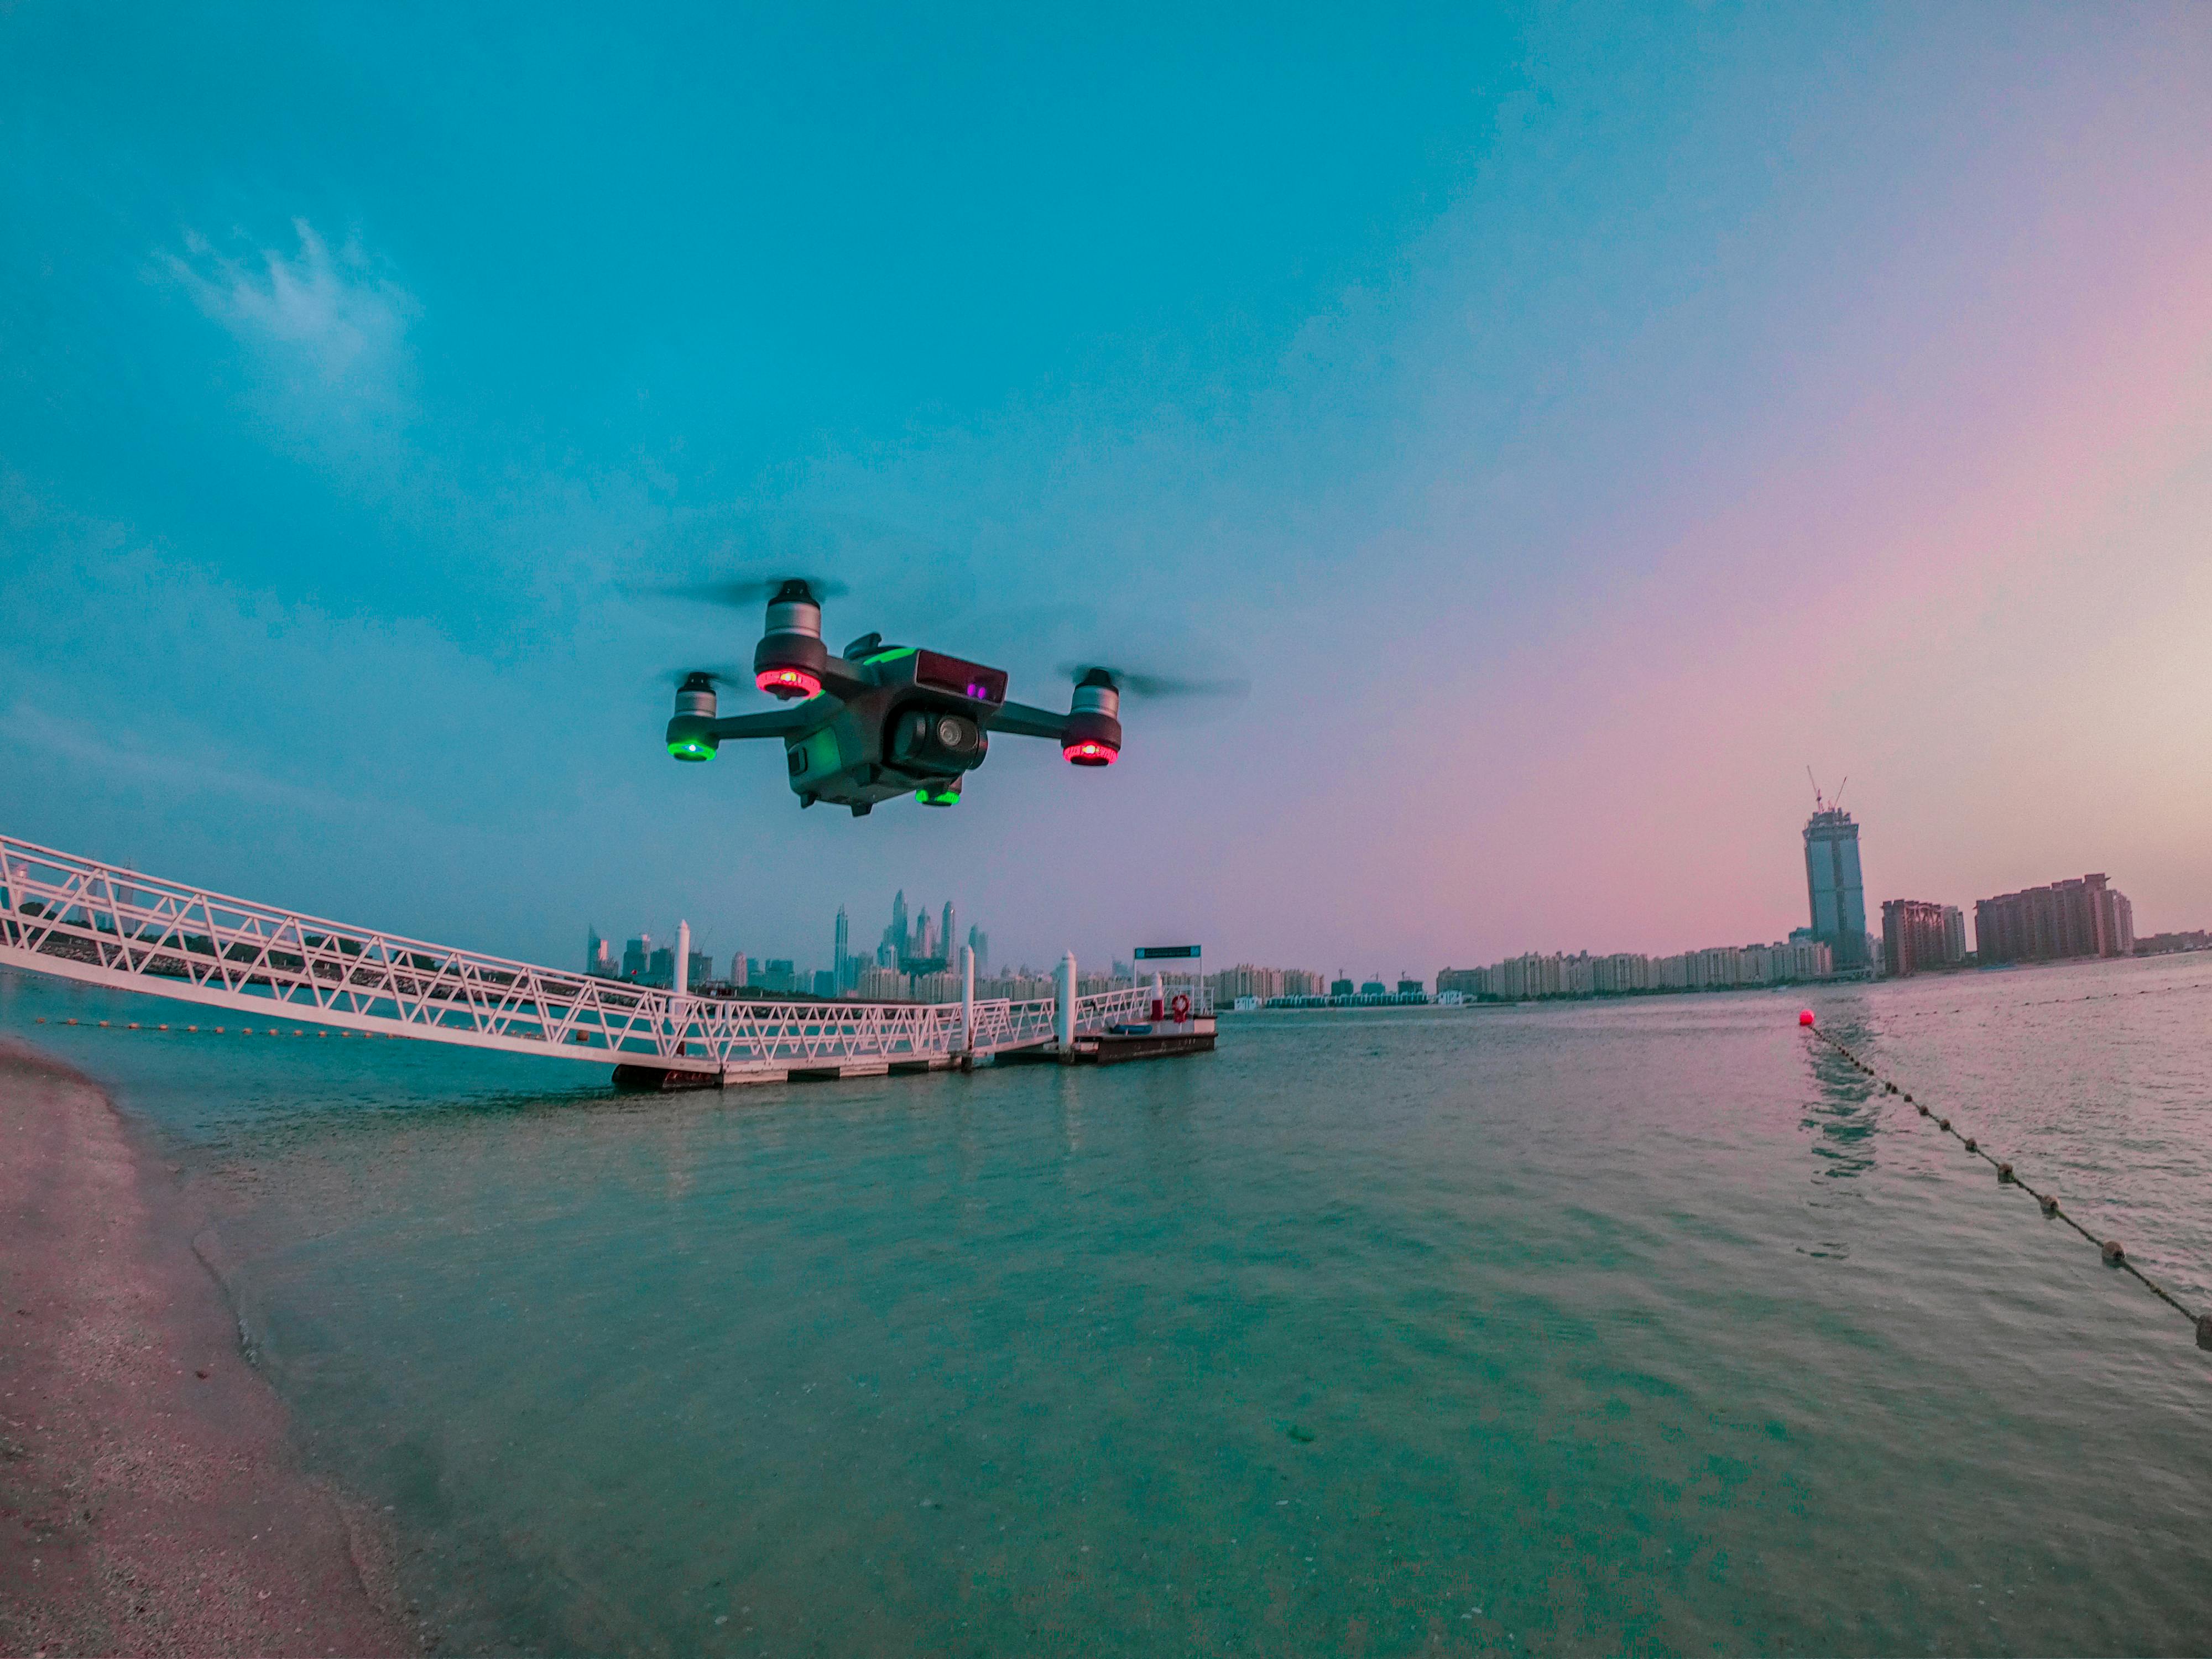 modern drone filming video while flying above city river